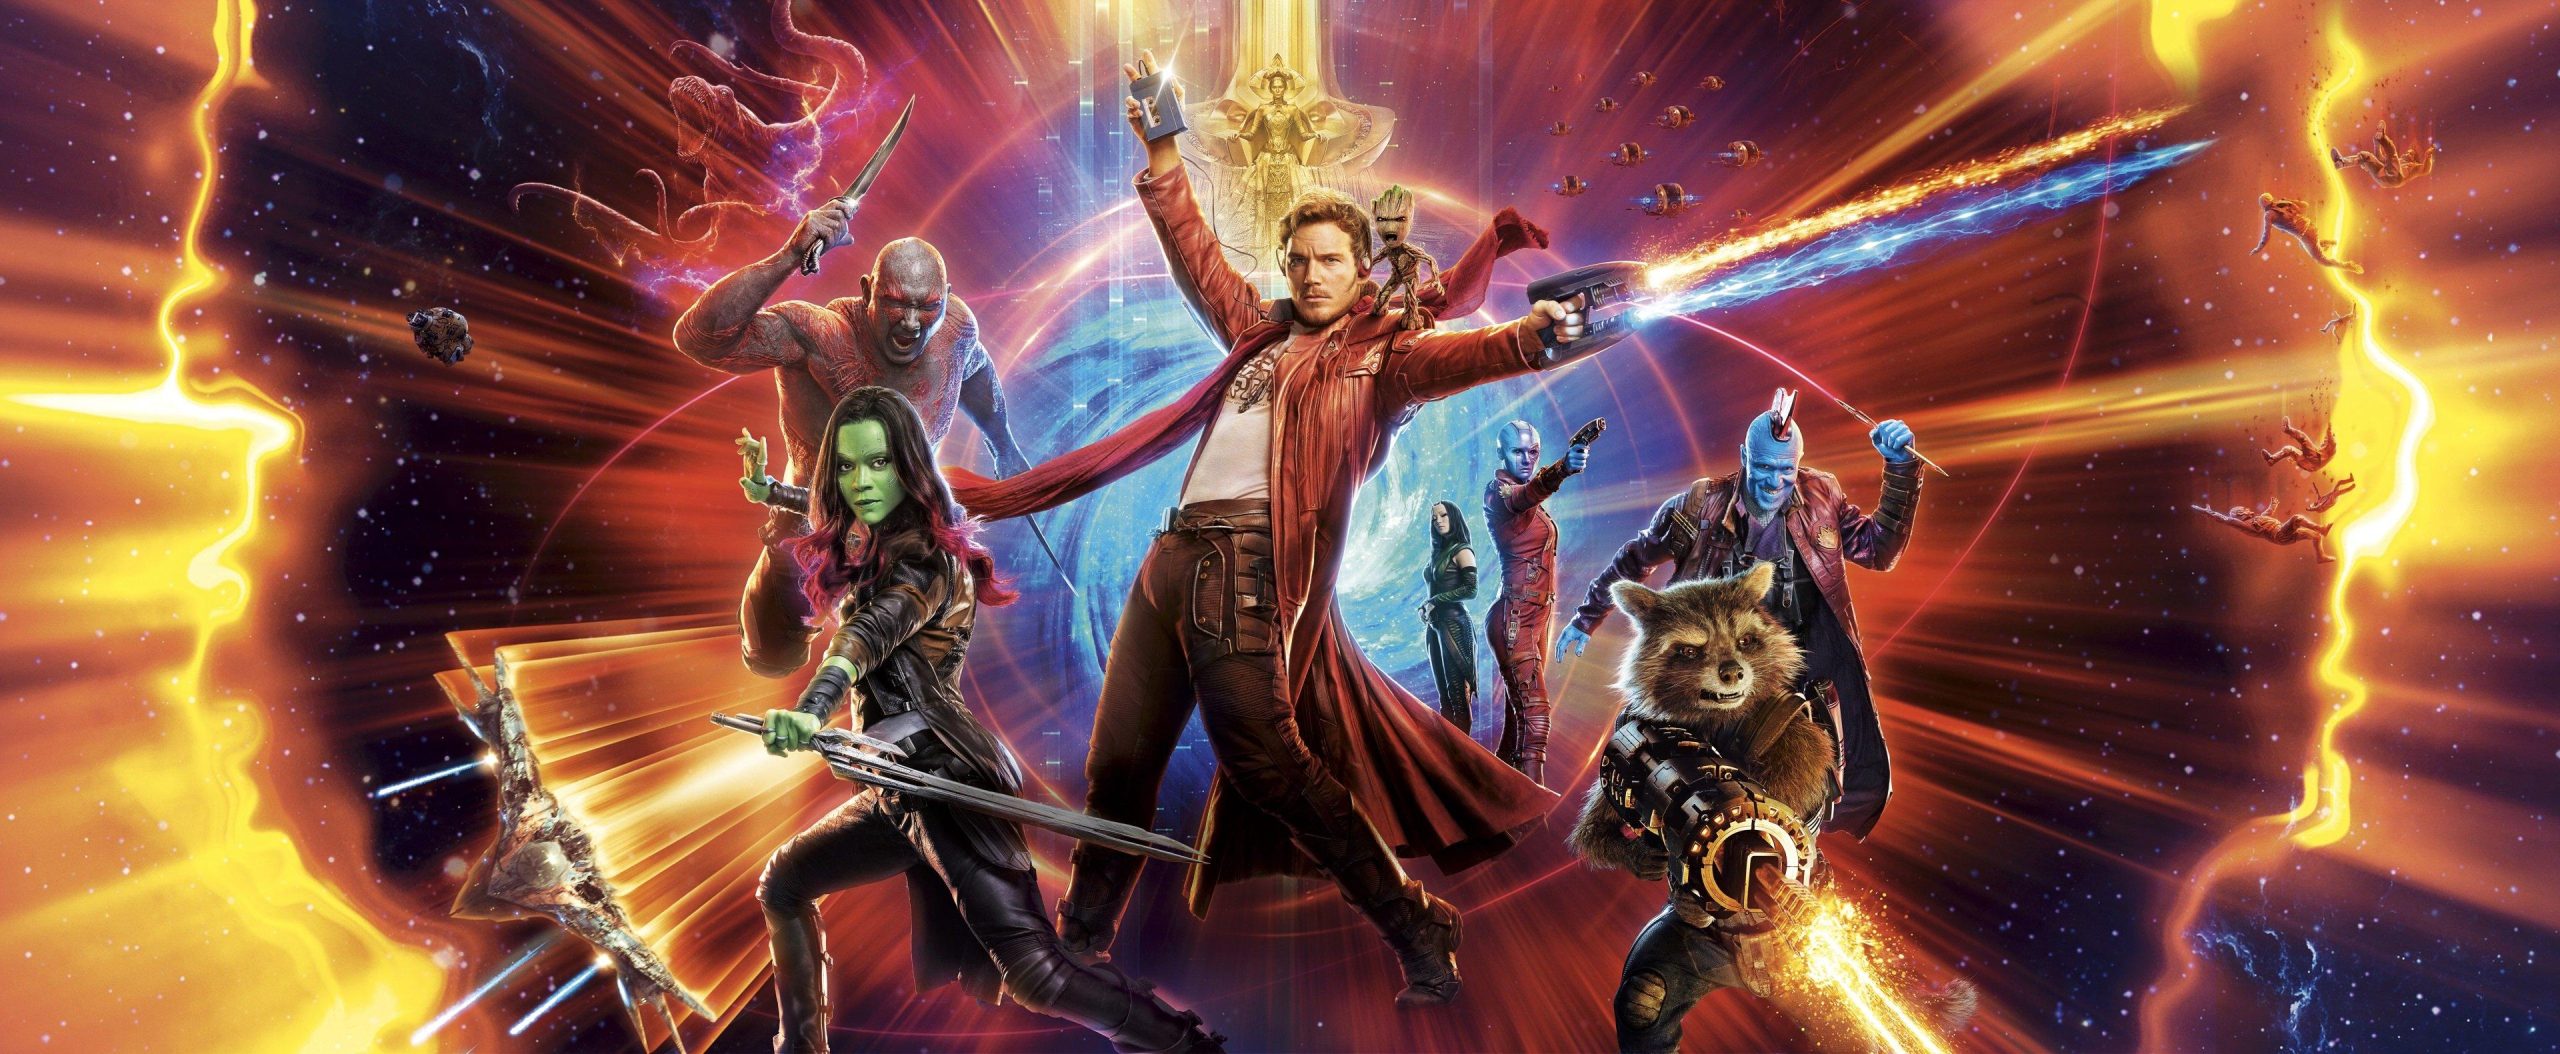 Guardians Of The Galaxy 4k Wallpaper 4k, Guardians Of The Galaxy 4k, Movies